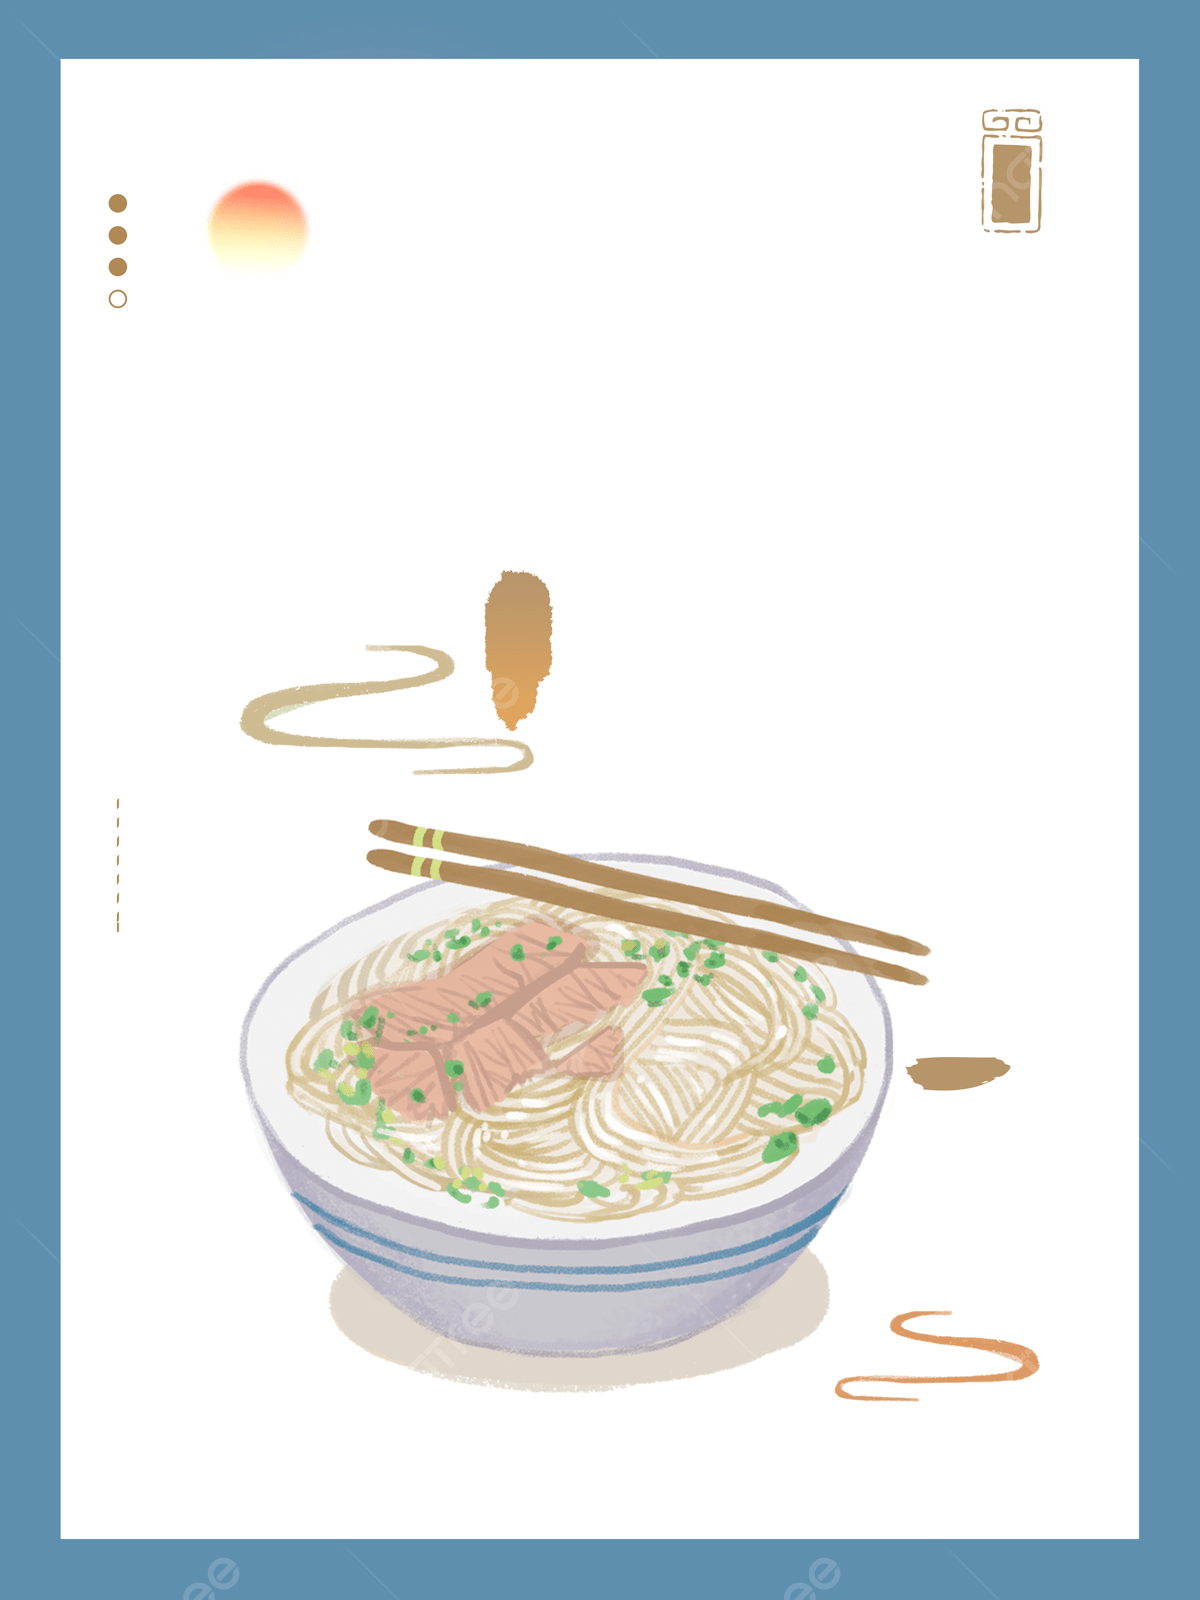 Hand Painted Lanzhou Ramen Advertising Background Wallpaper Image For Free Download